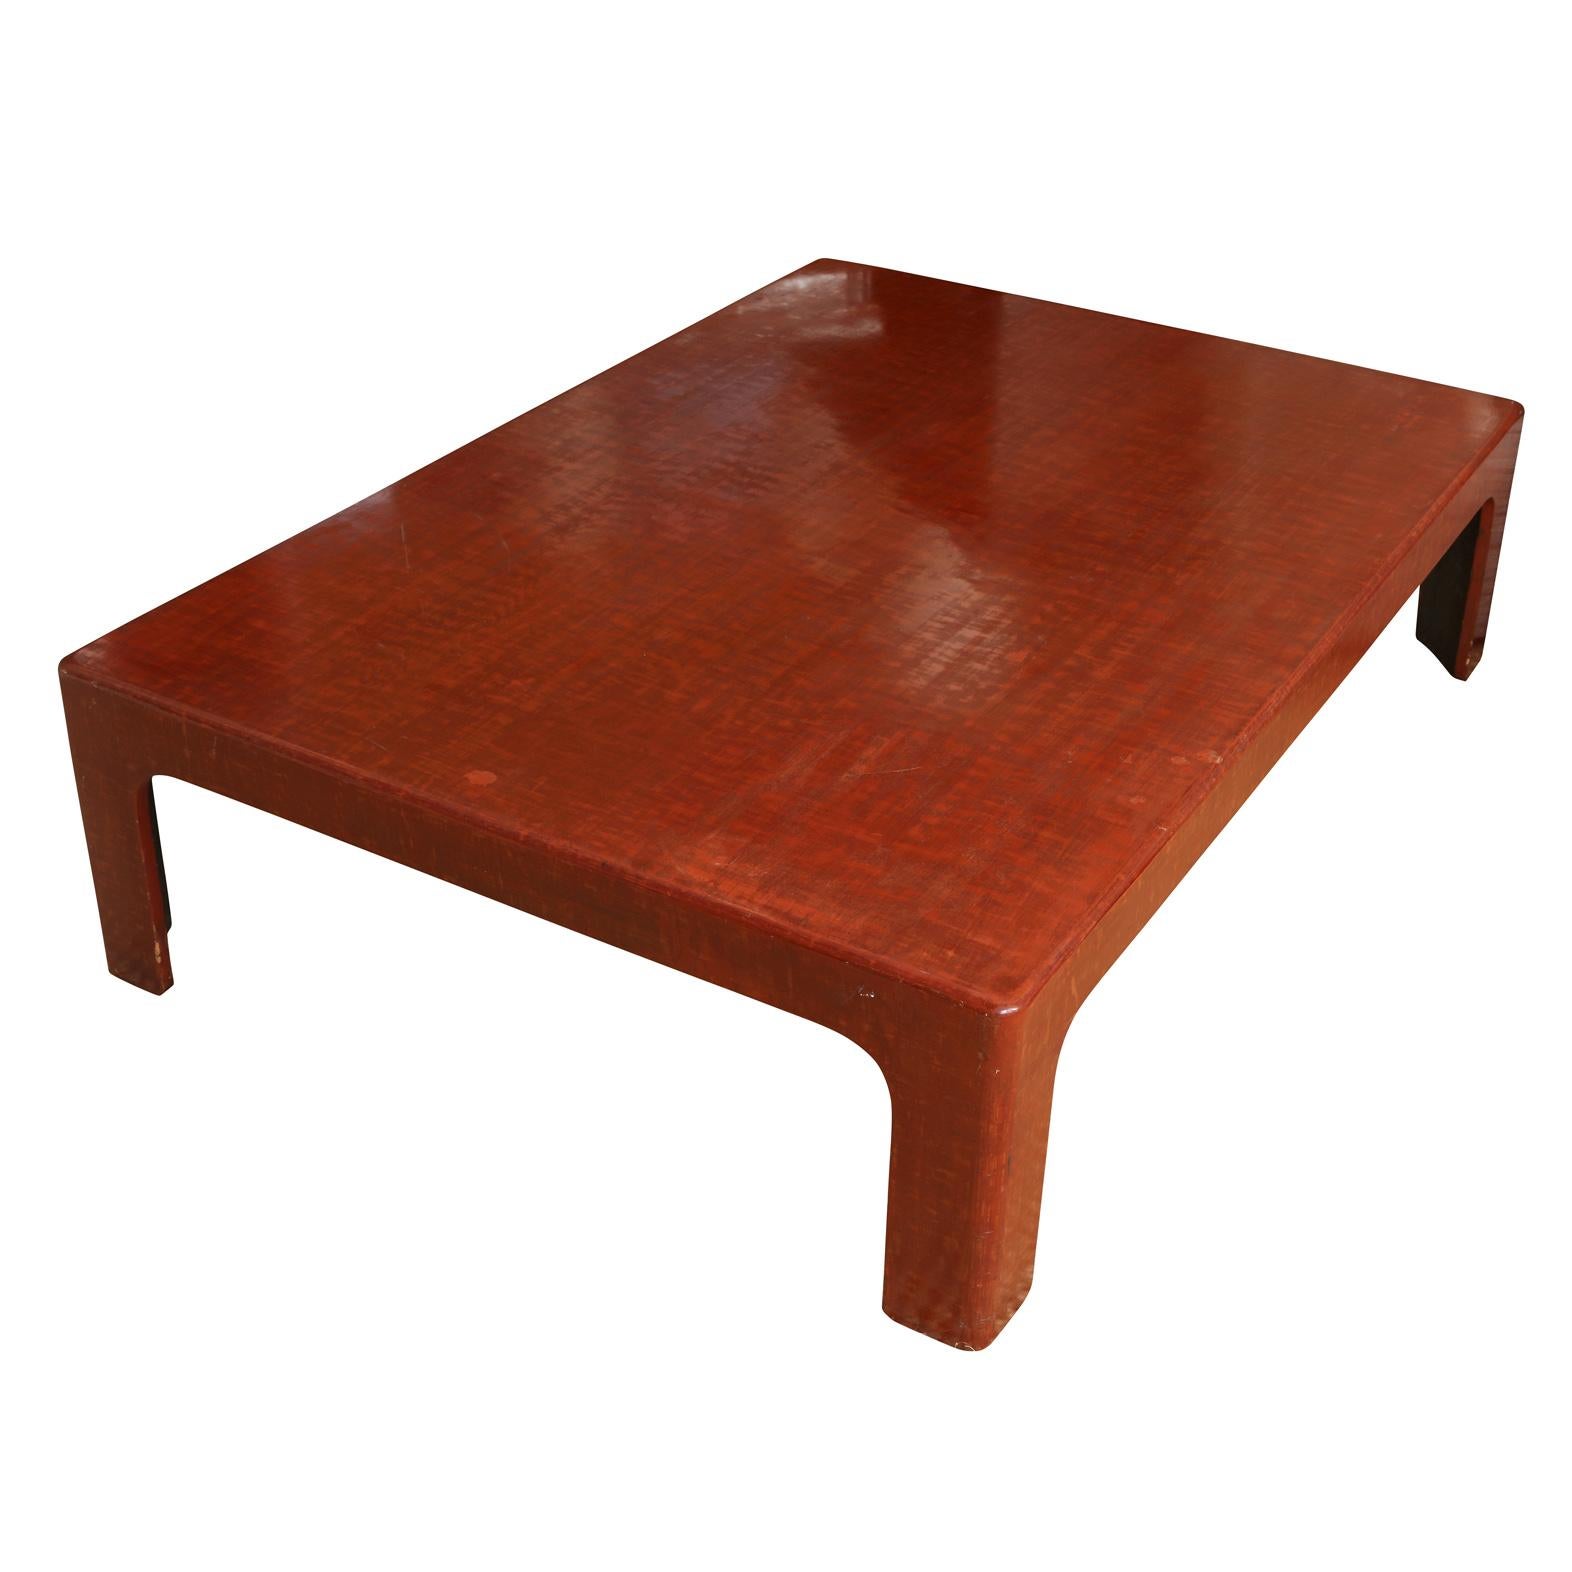 A faux rosewood coffee table in Asian style.